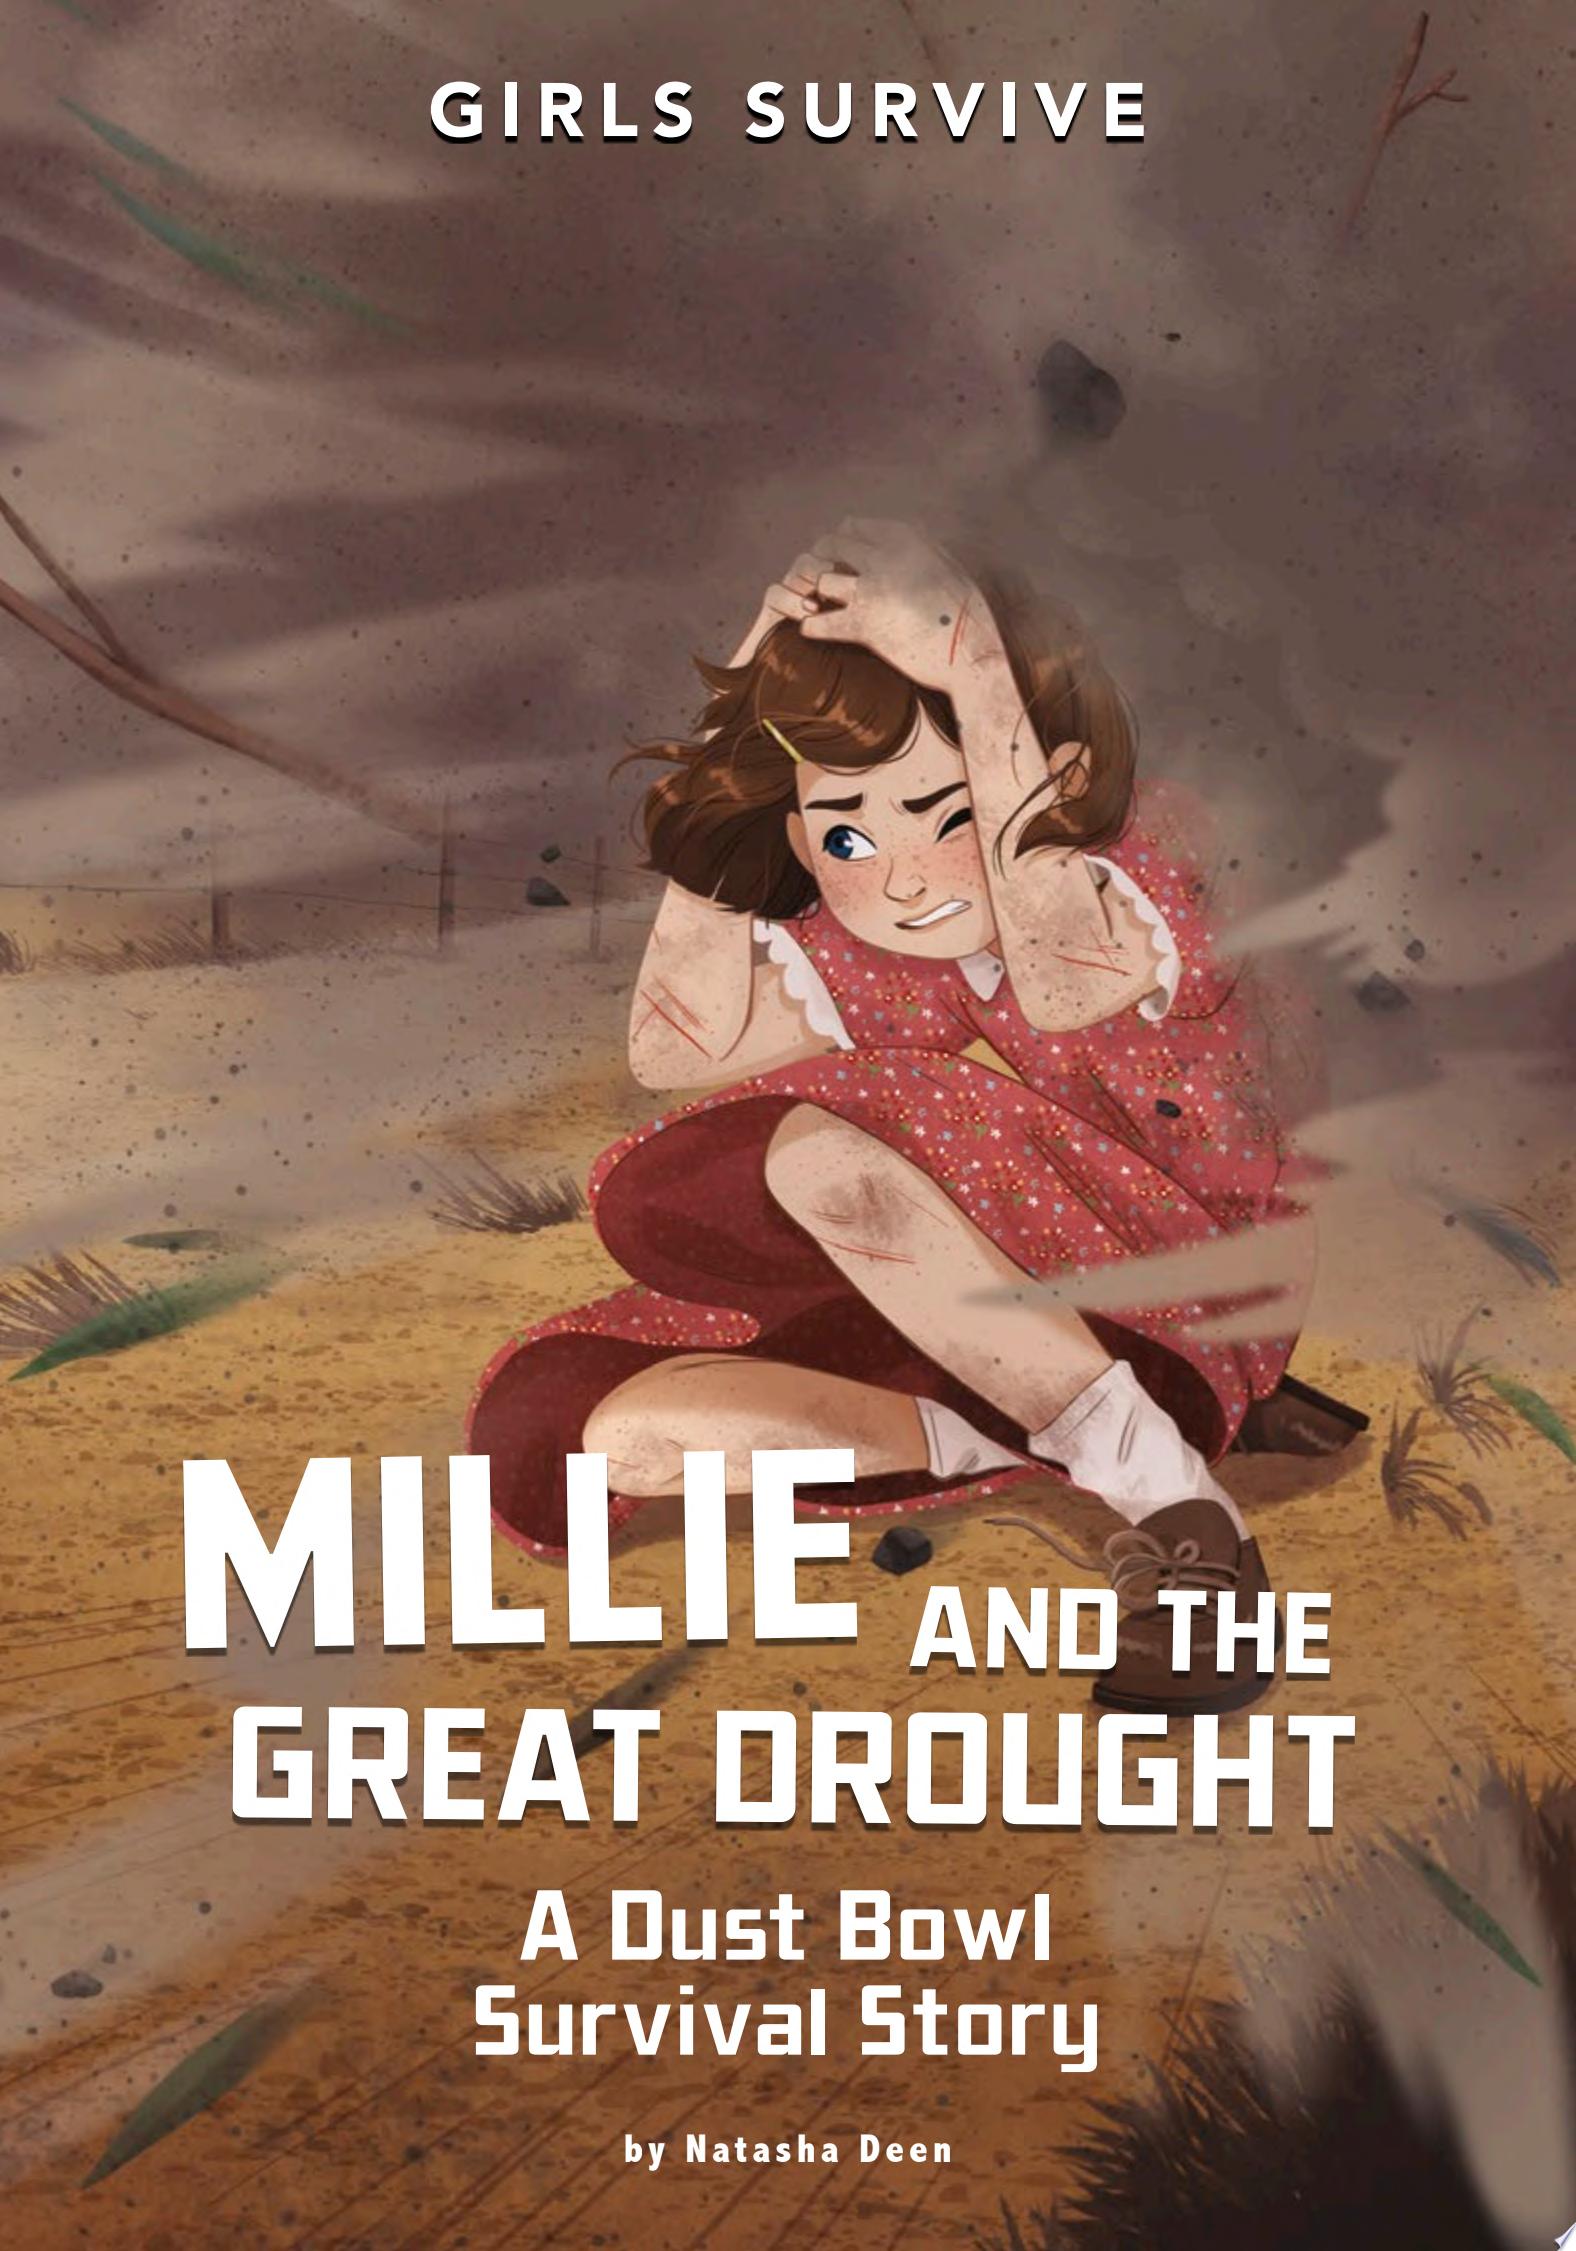 Image for "Millie and the Great Drought"